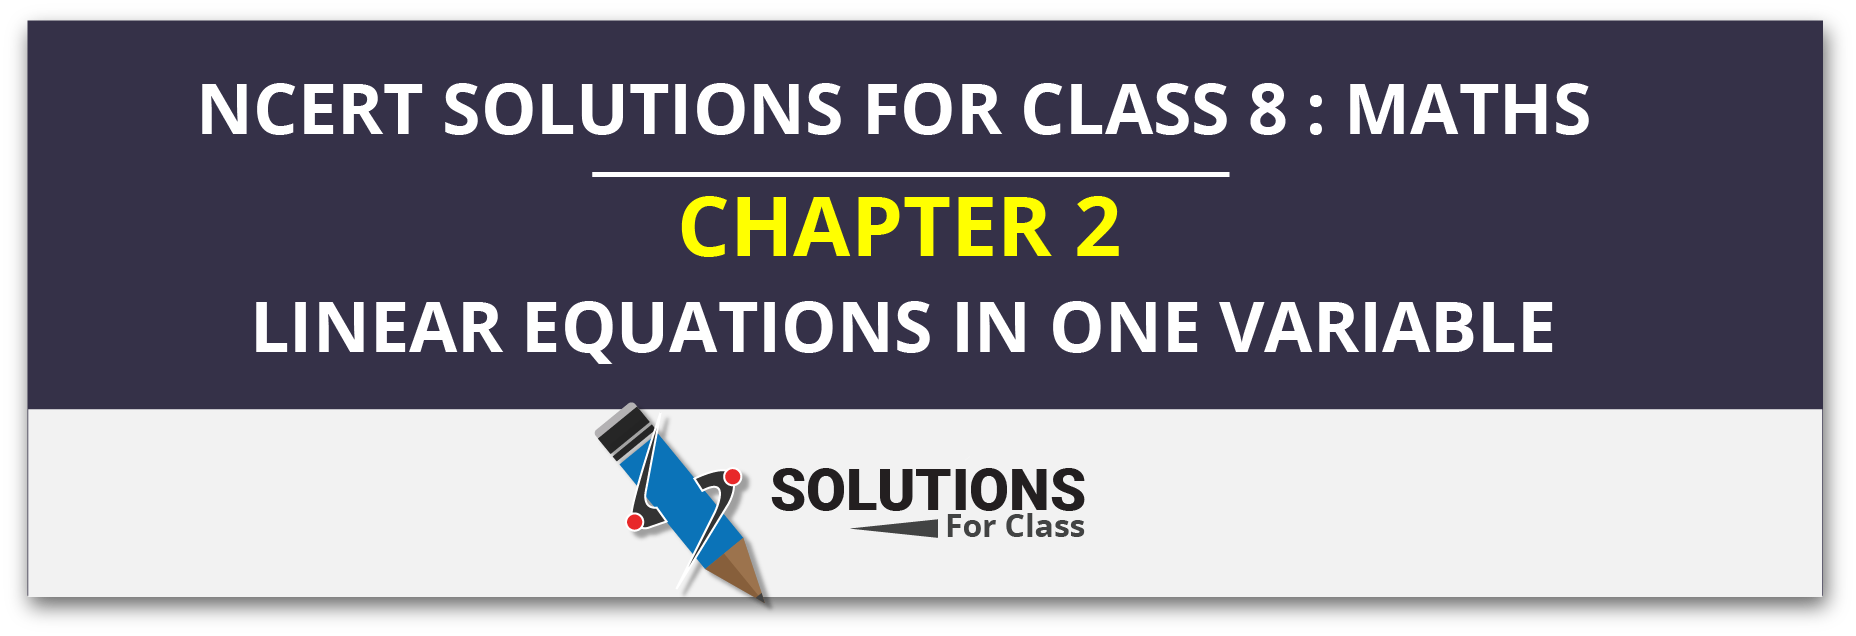 NCERT Solution For Class 8, Maths, Linear Equations In One Variable